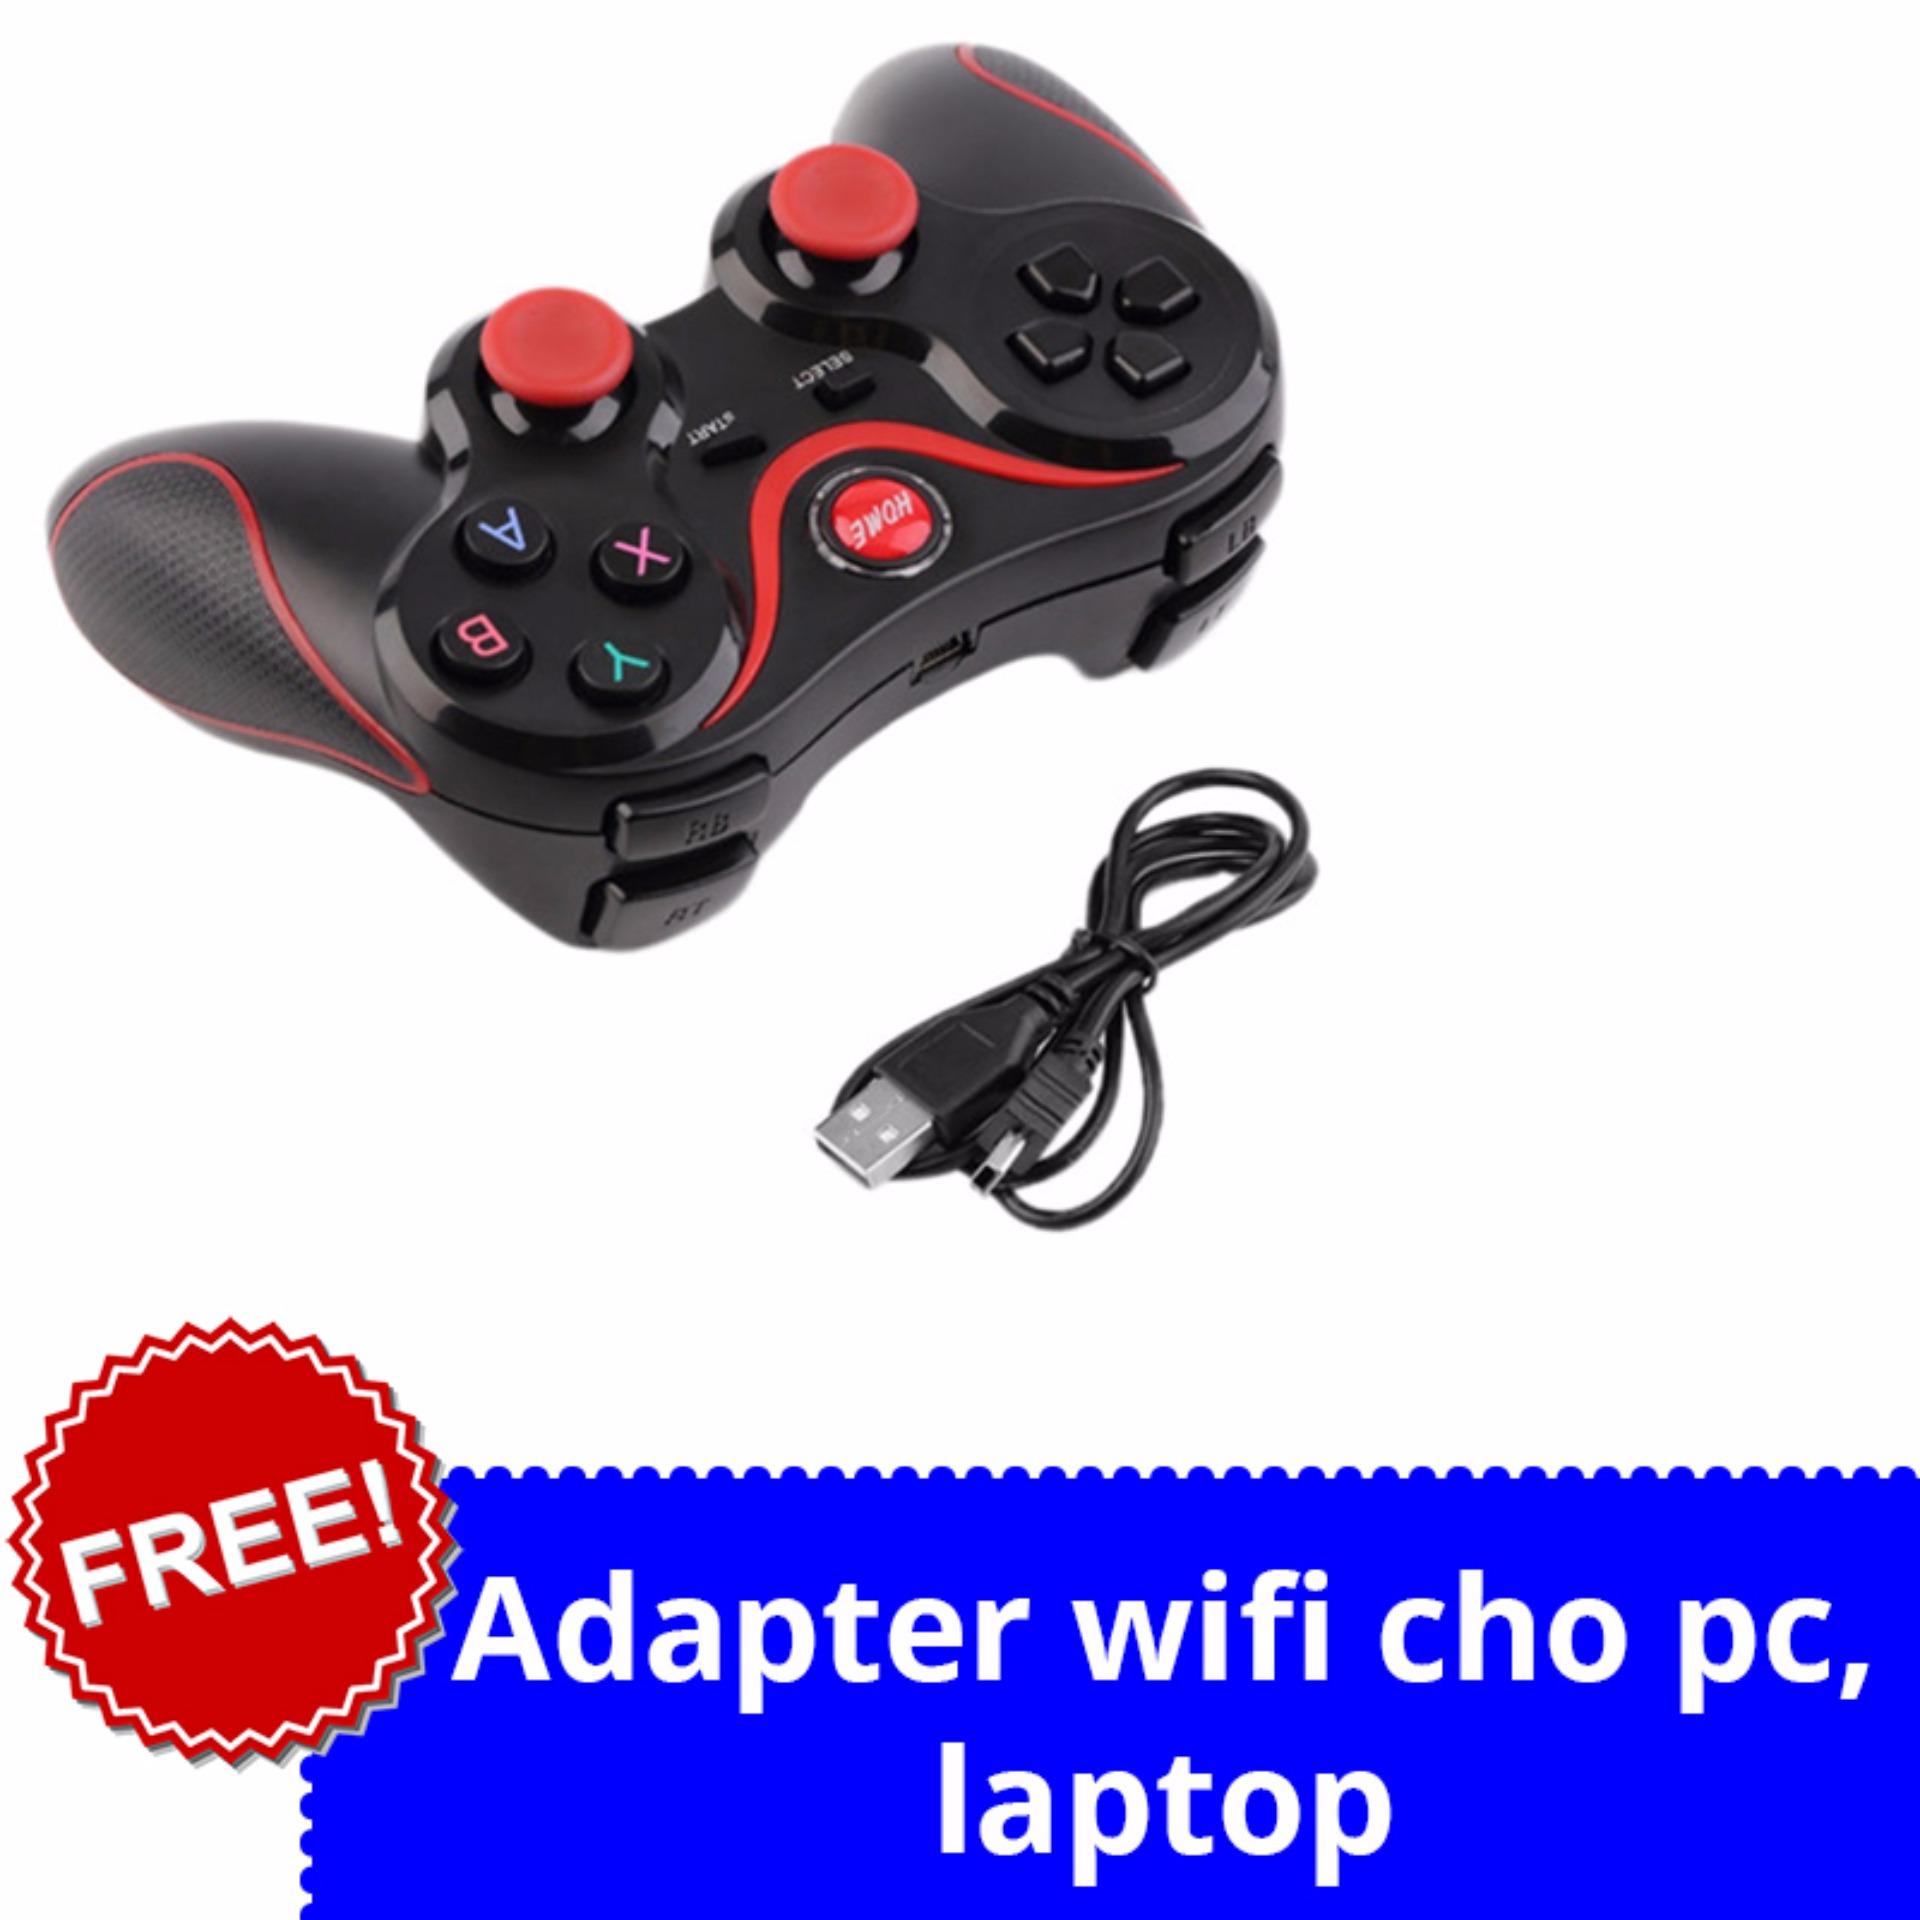 Tay game C8 bluetooth + wifi cho android, android box, pc, laptop